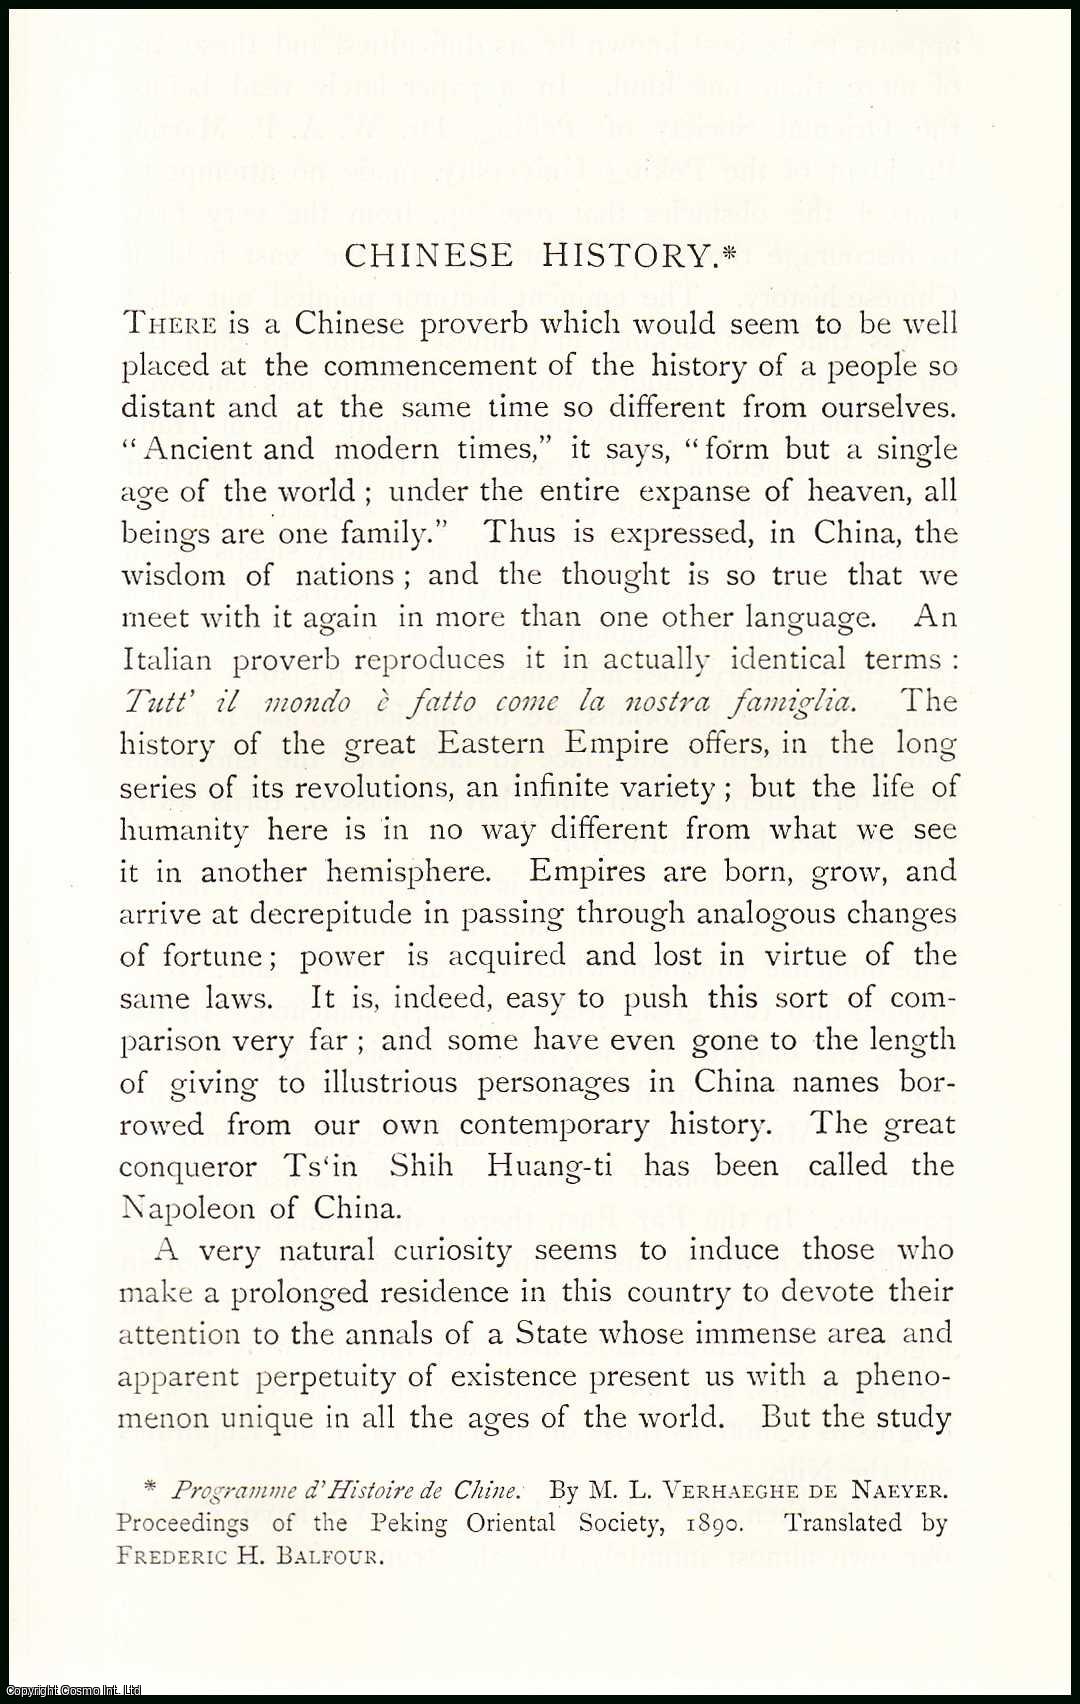 Frederic H. Balfour - Chinese History. An uncommon original article from The Asiatic Quarterly Review, 1890.